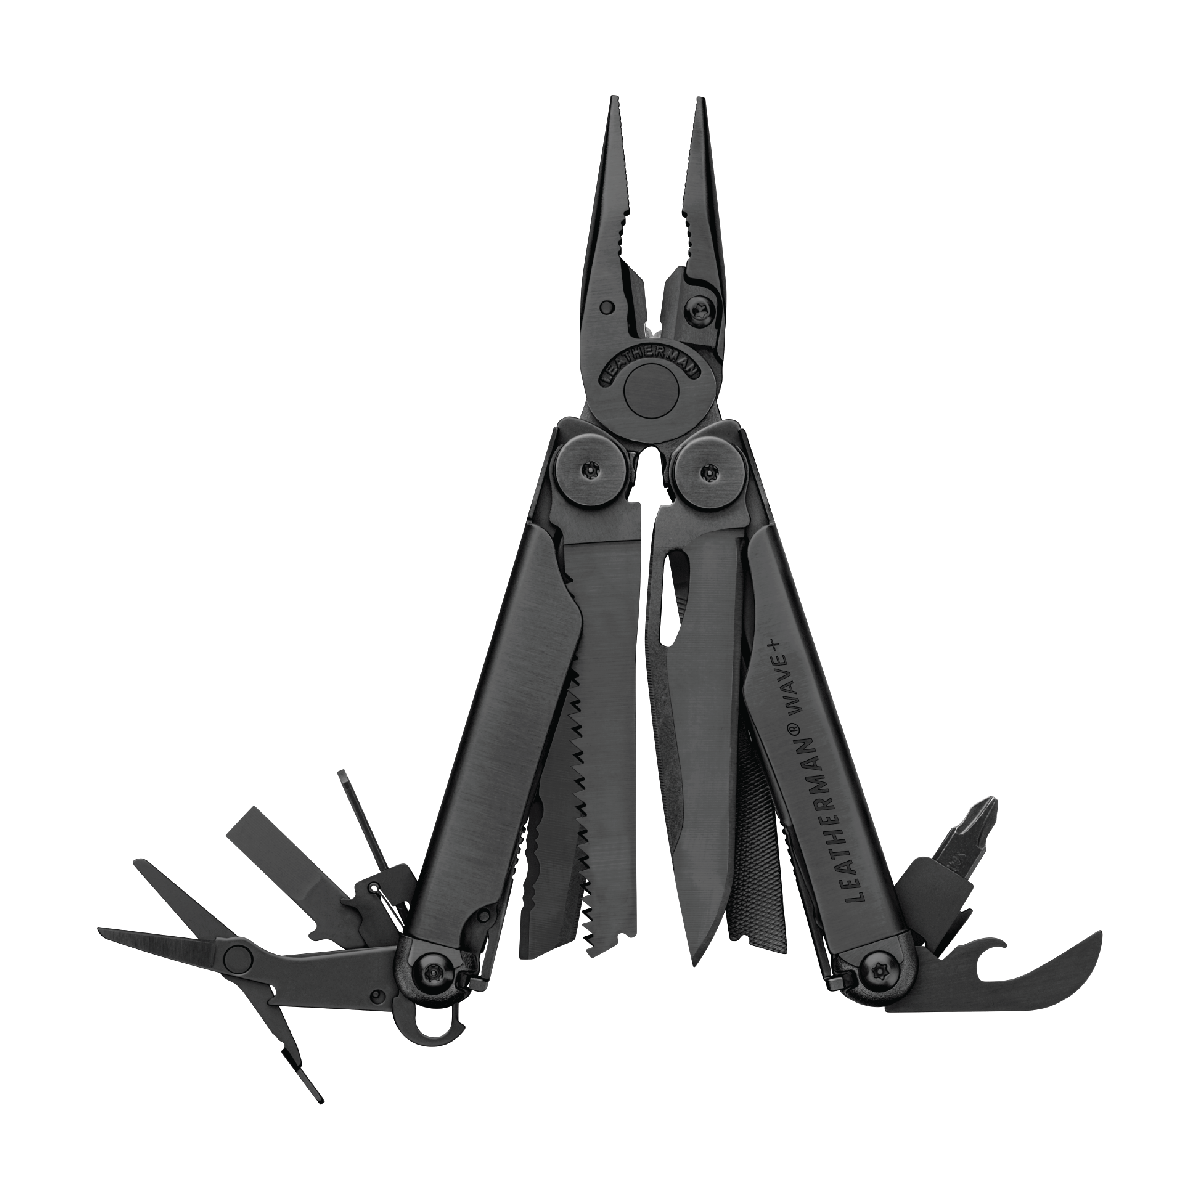 The Leatherman® Signal™ has arrived.